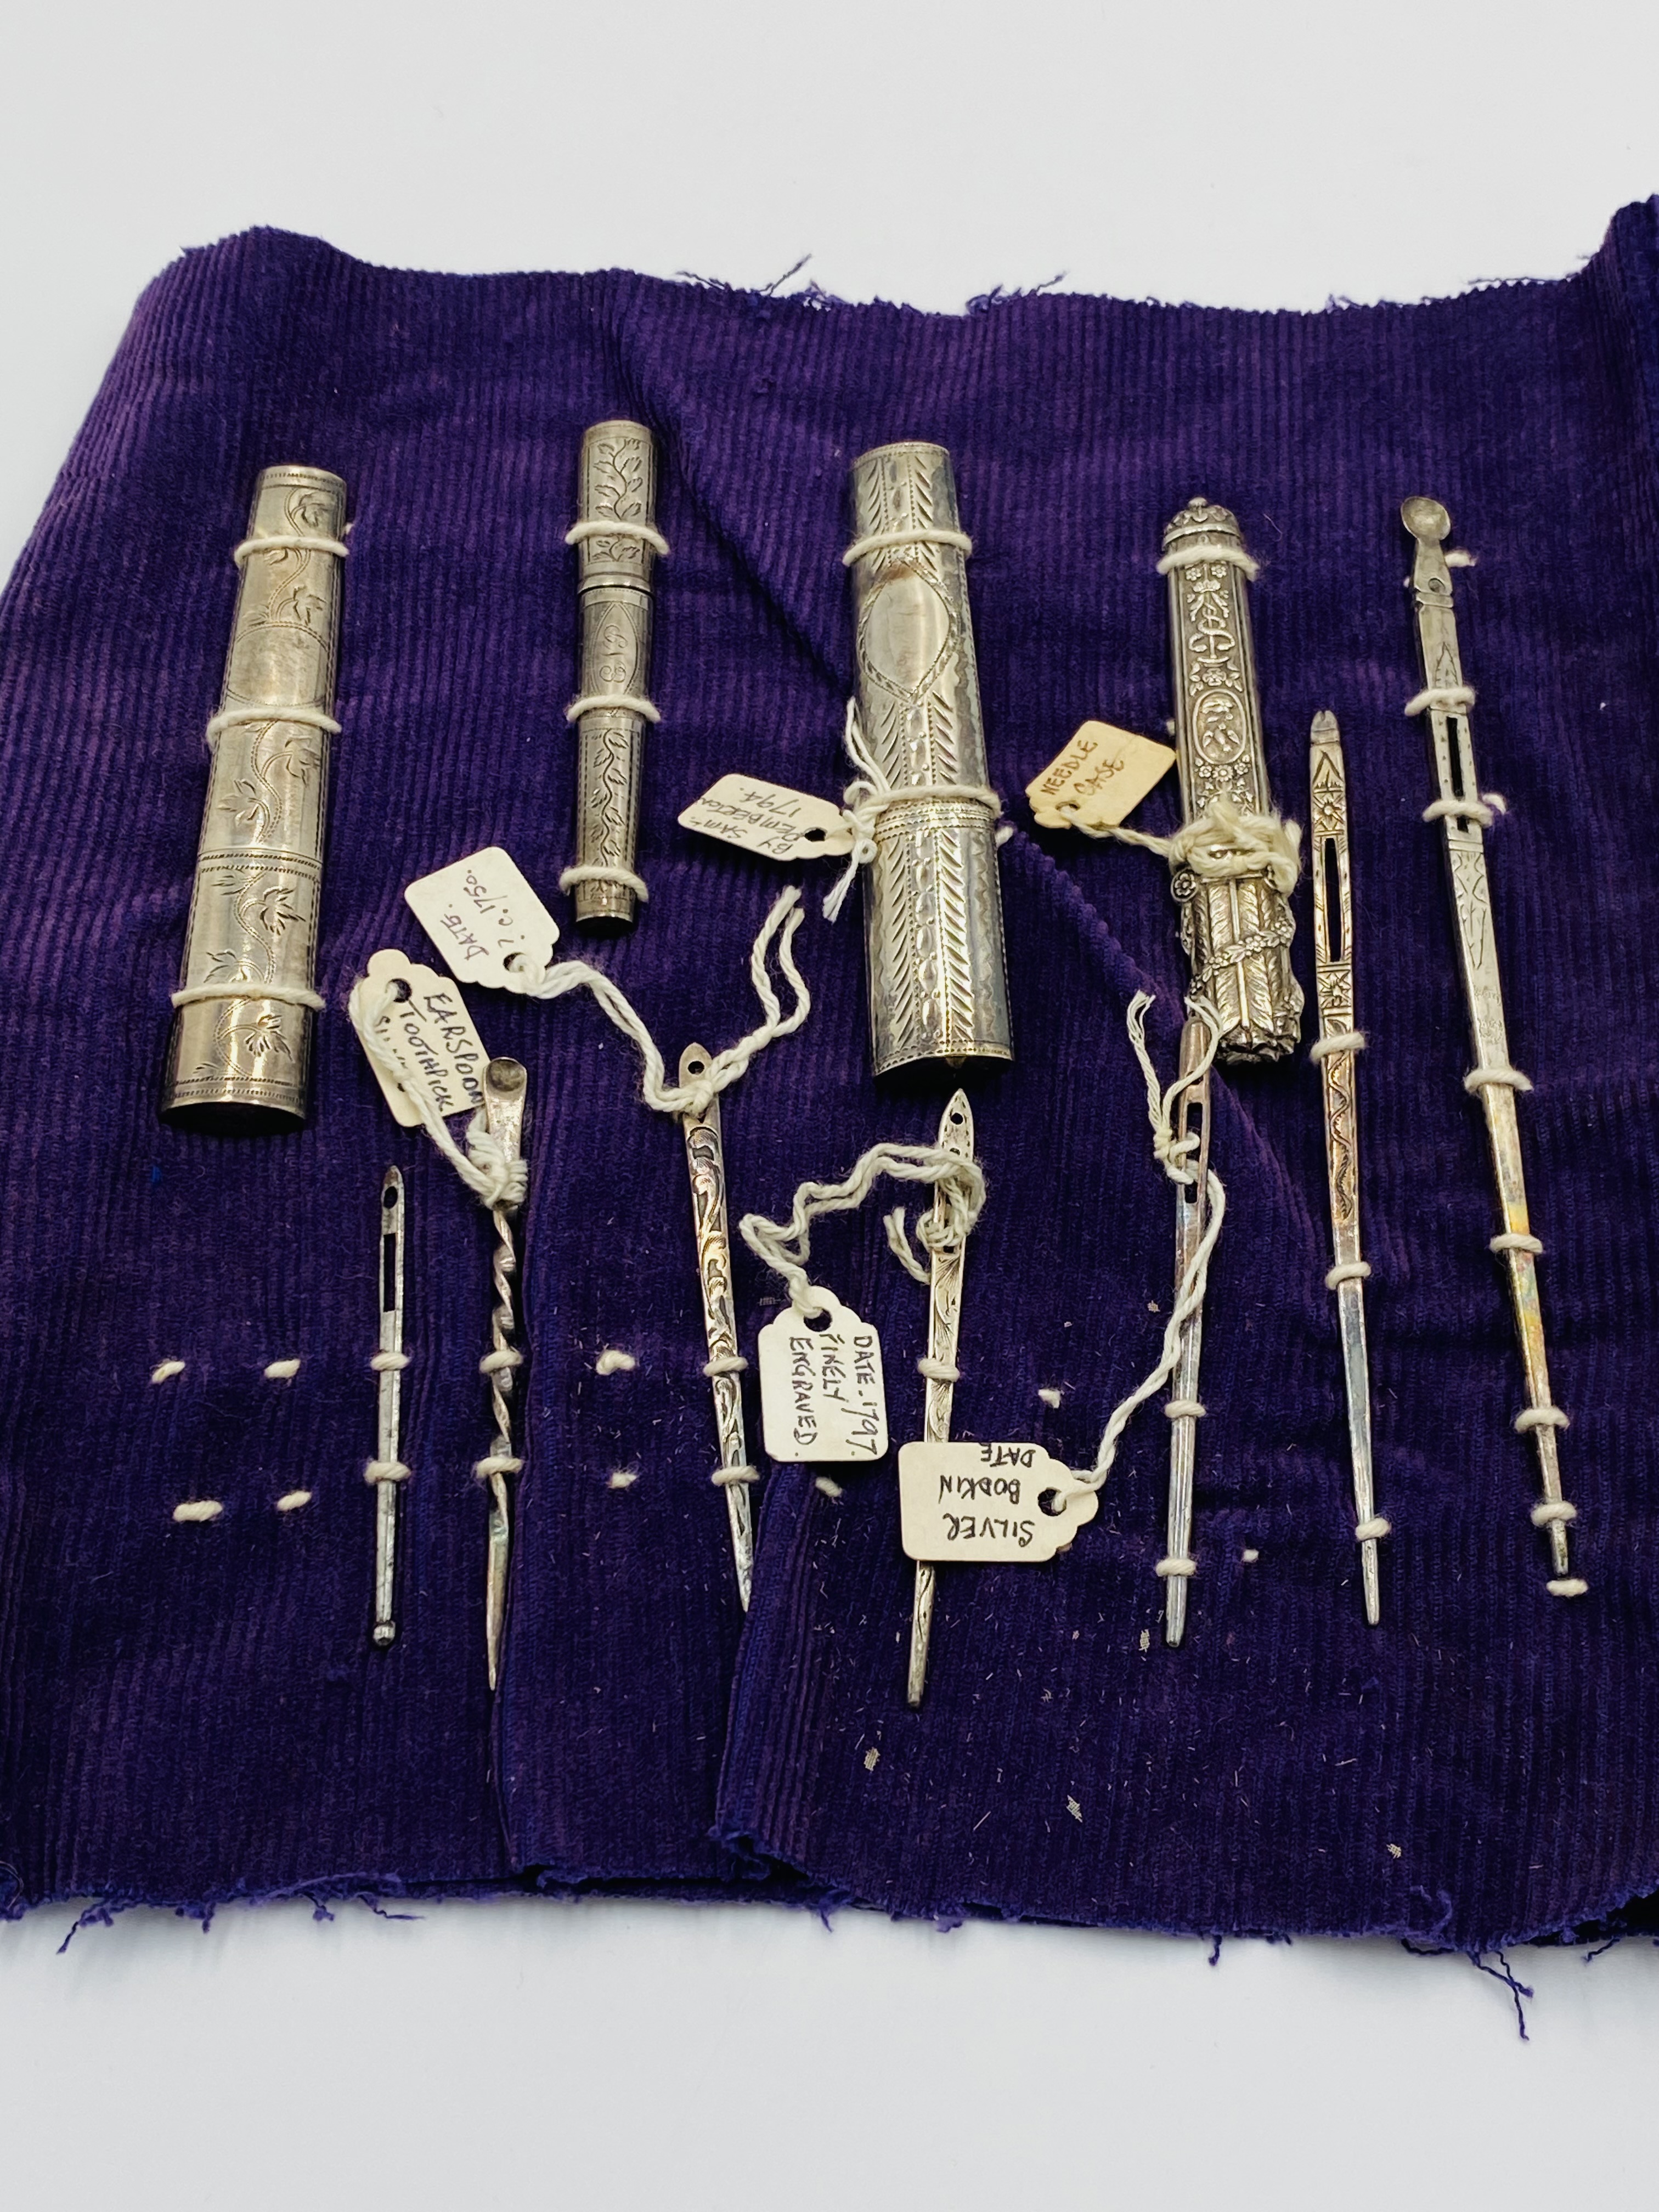 A collection of silver needle cases and bodkins - Image 4 of 5